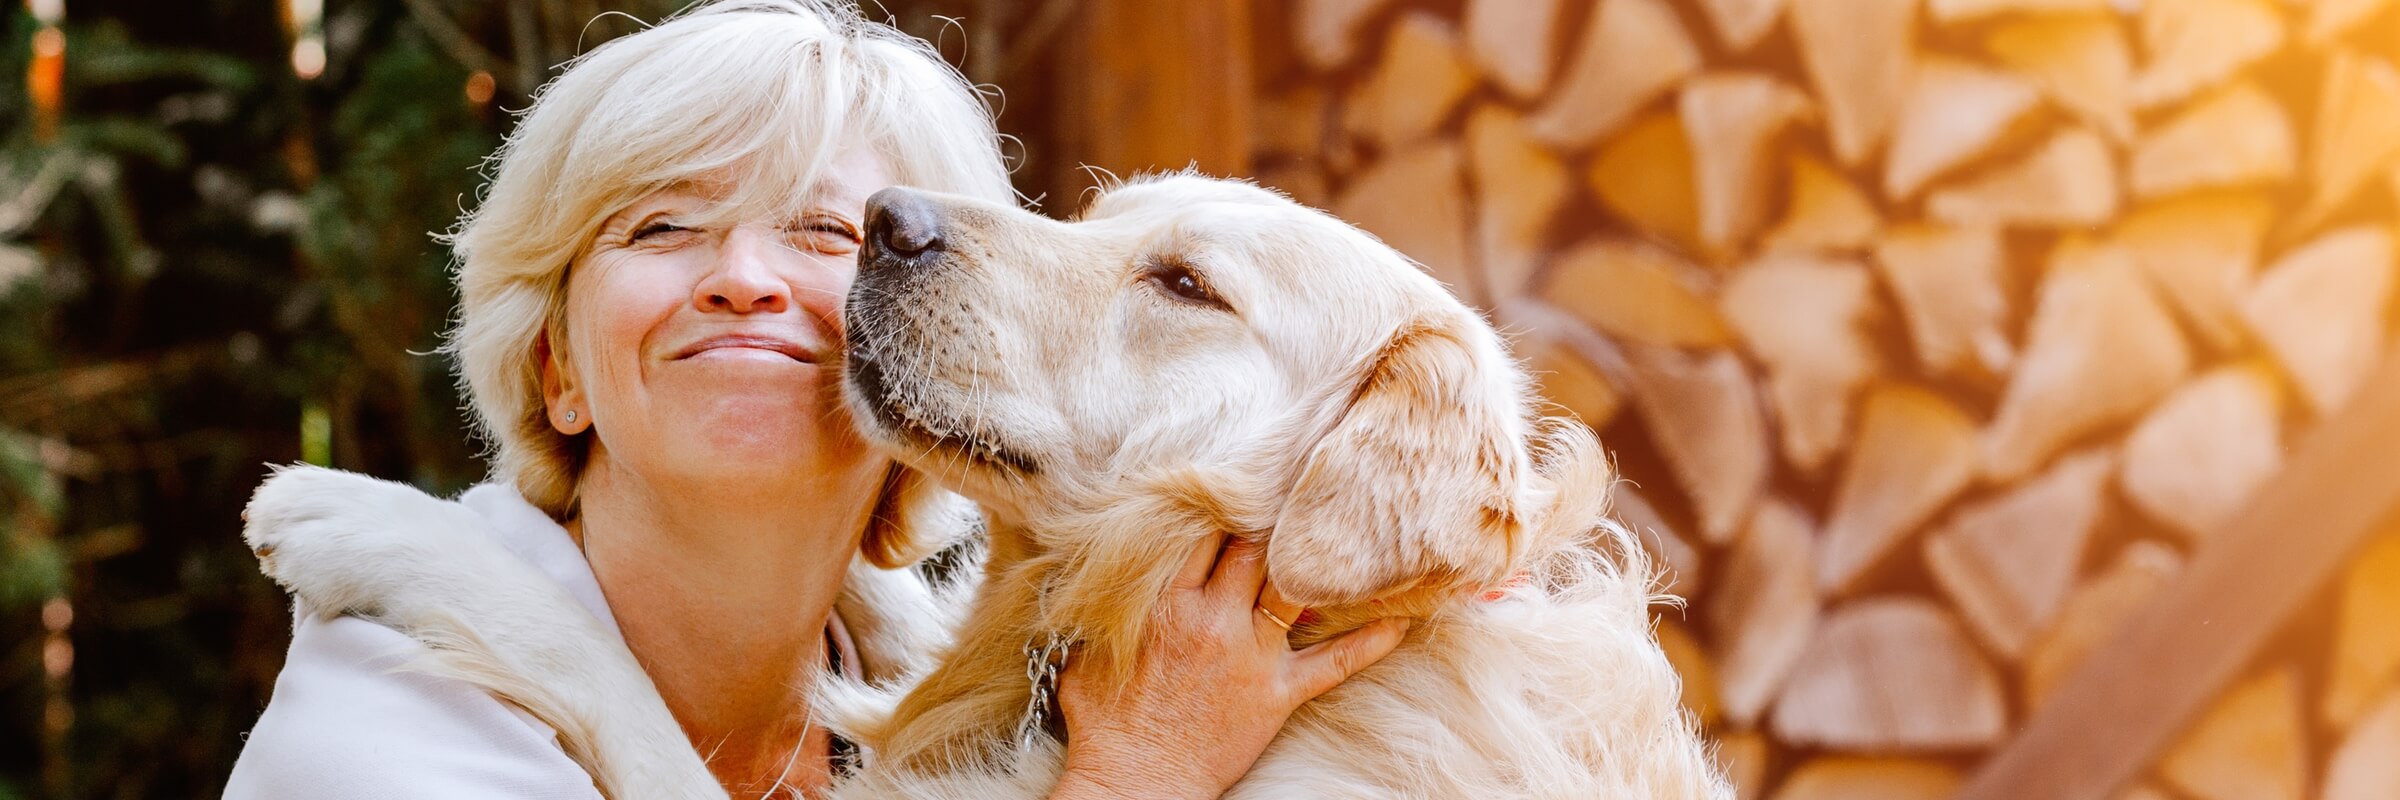 Sun shining on smiling woman receiving hug from aging golden retriever with woodpile in the background